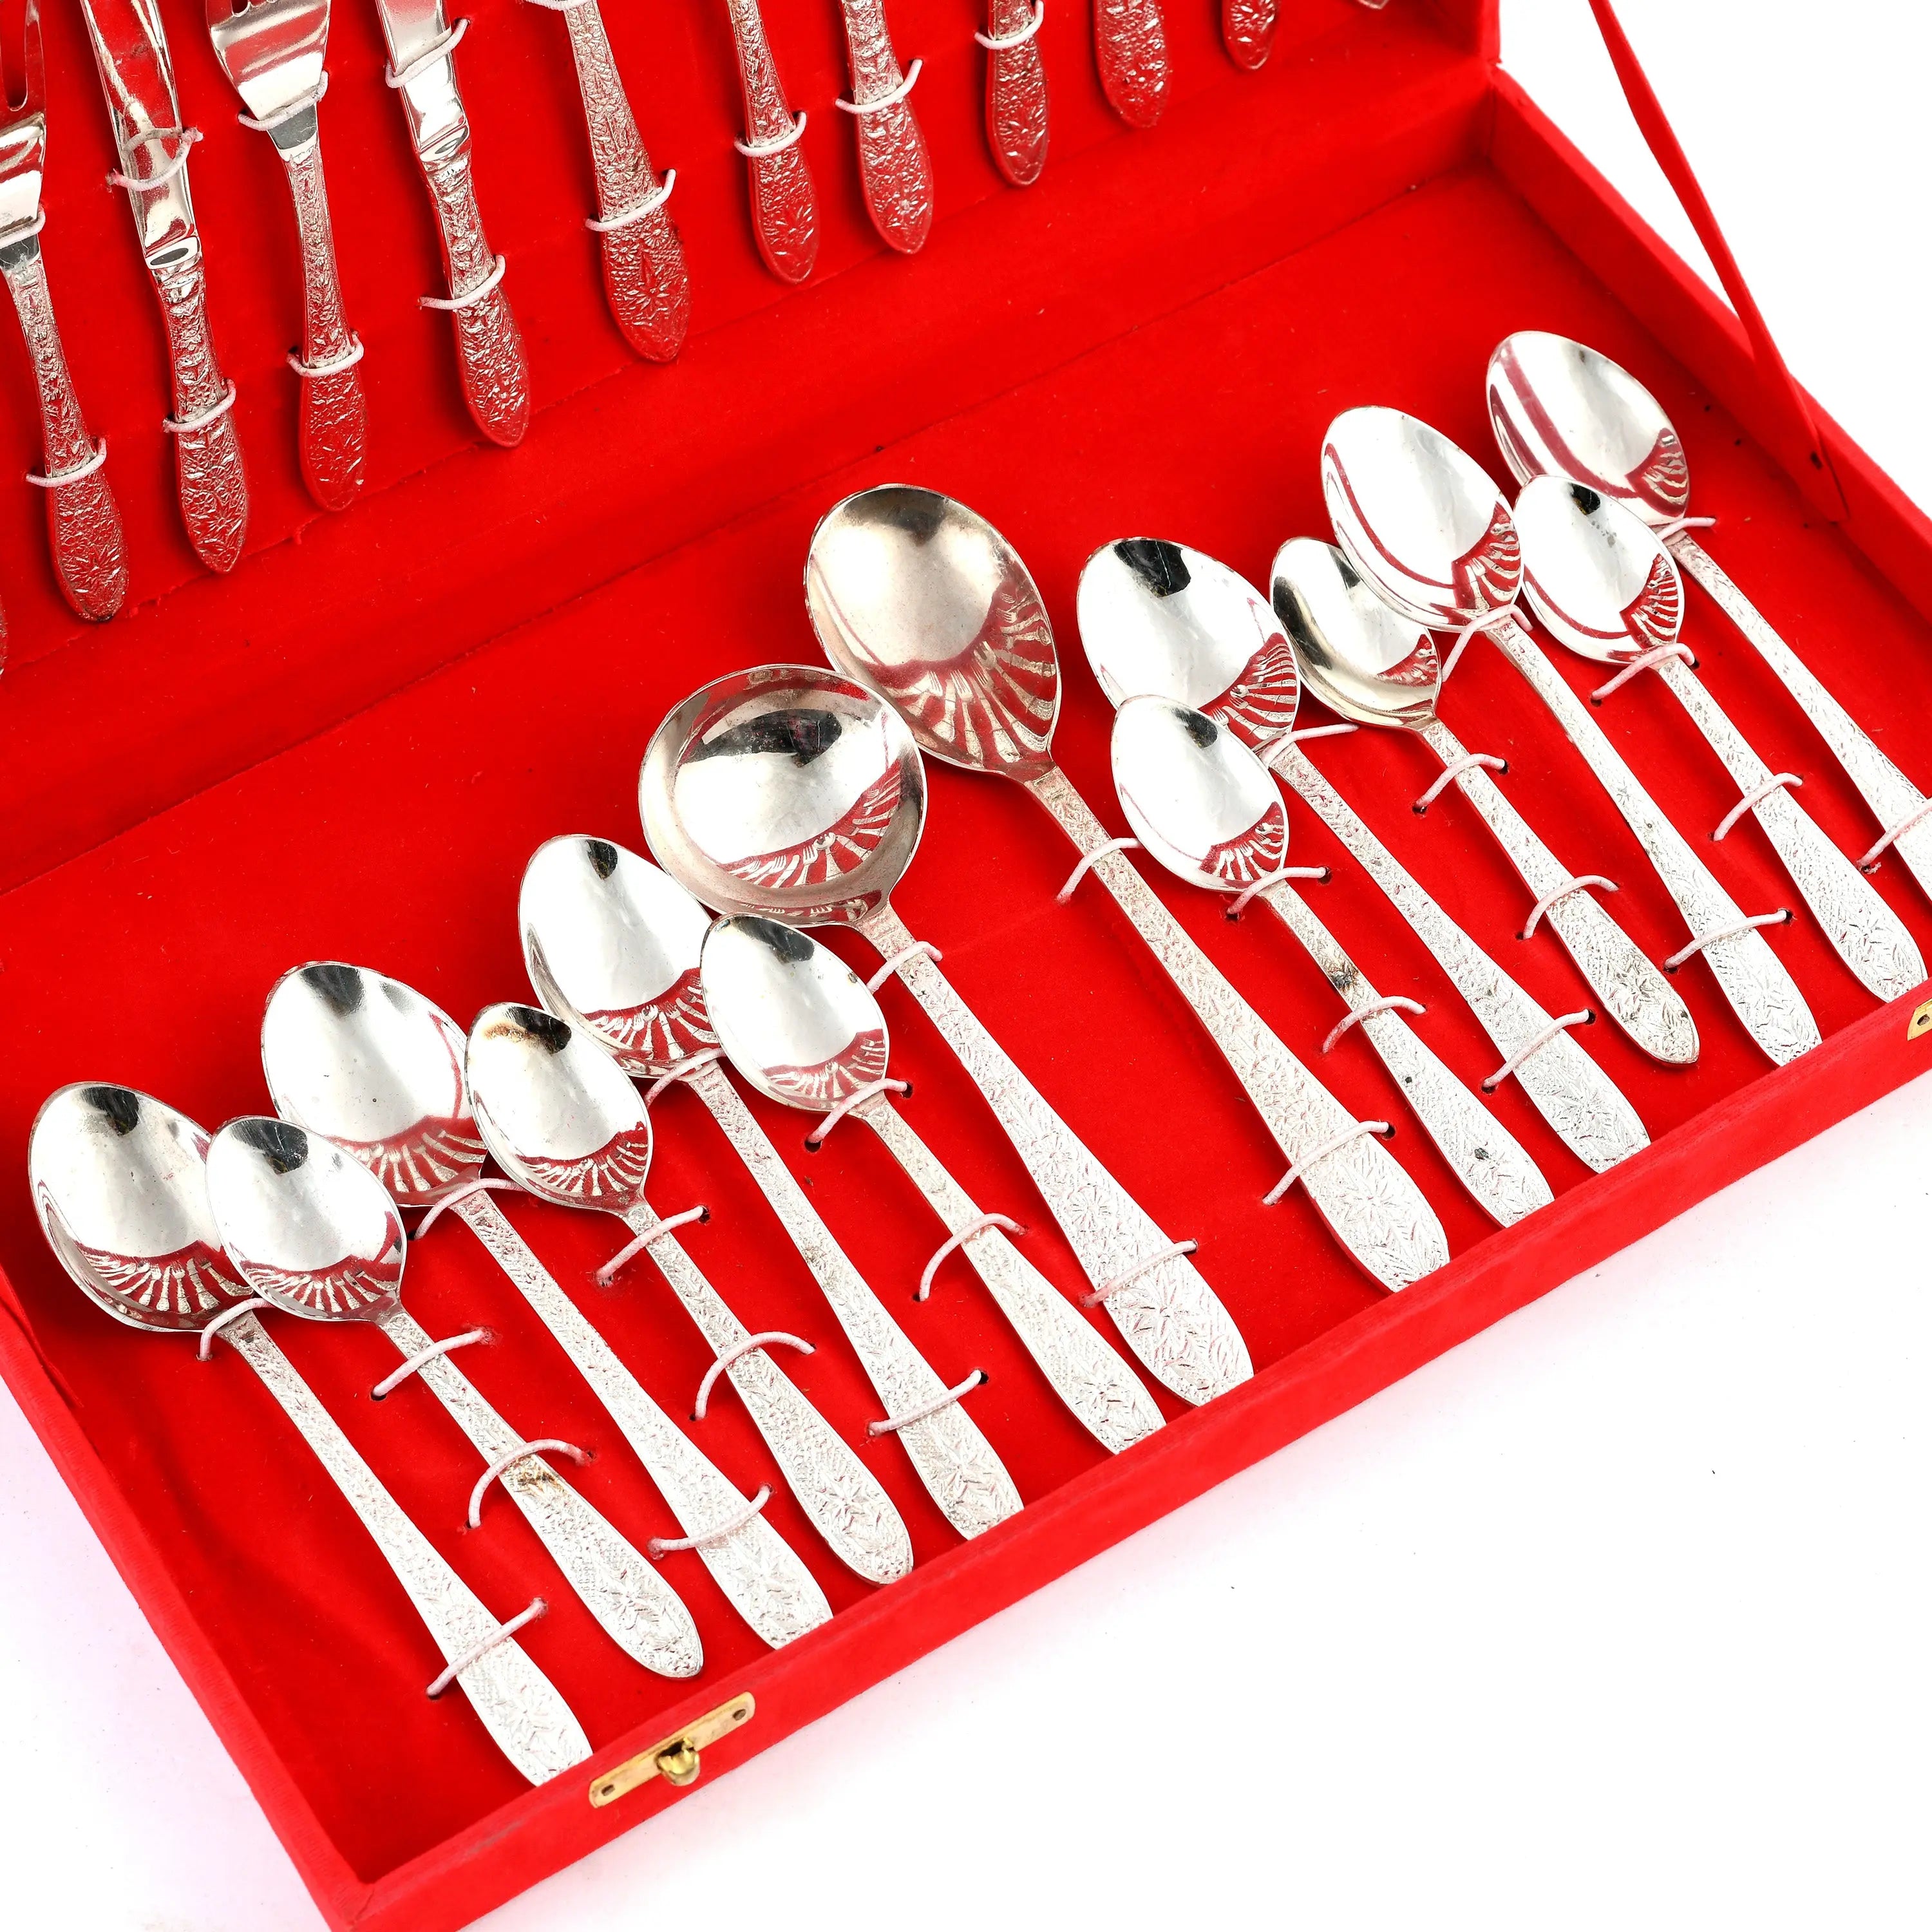 Pure Silver Cutlery Set For Gifting & Dining, Set of 27 Pcs - CROCKERY WALA AND COMPANY 